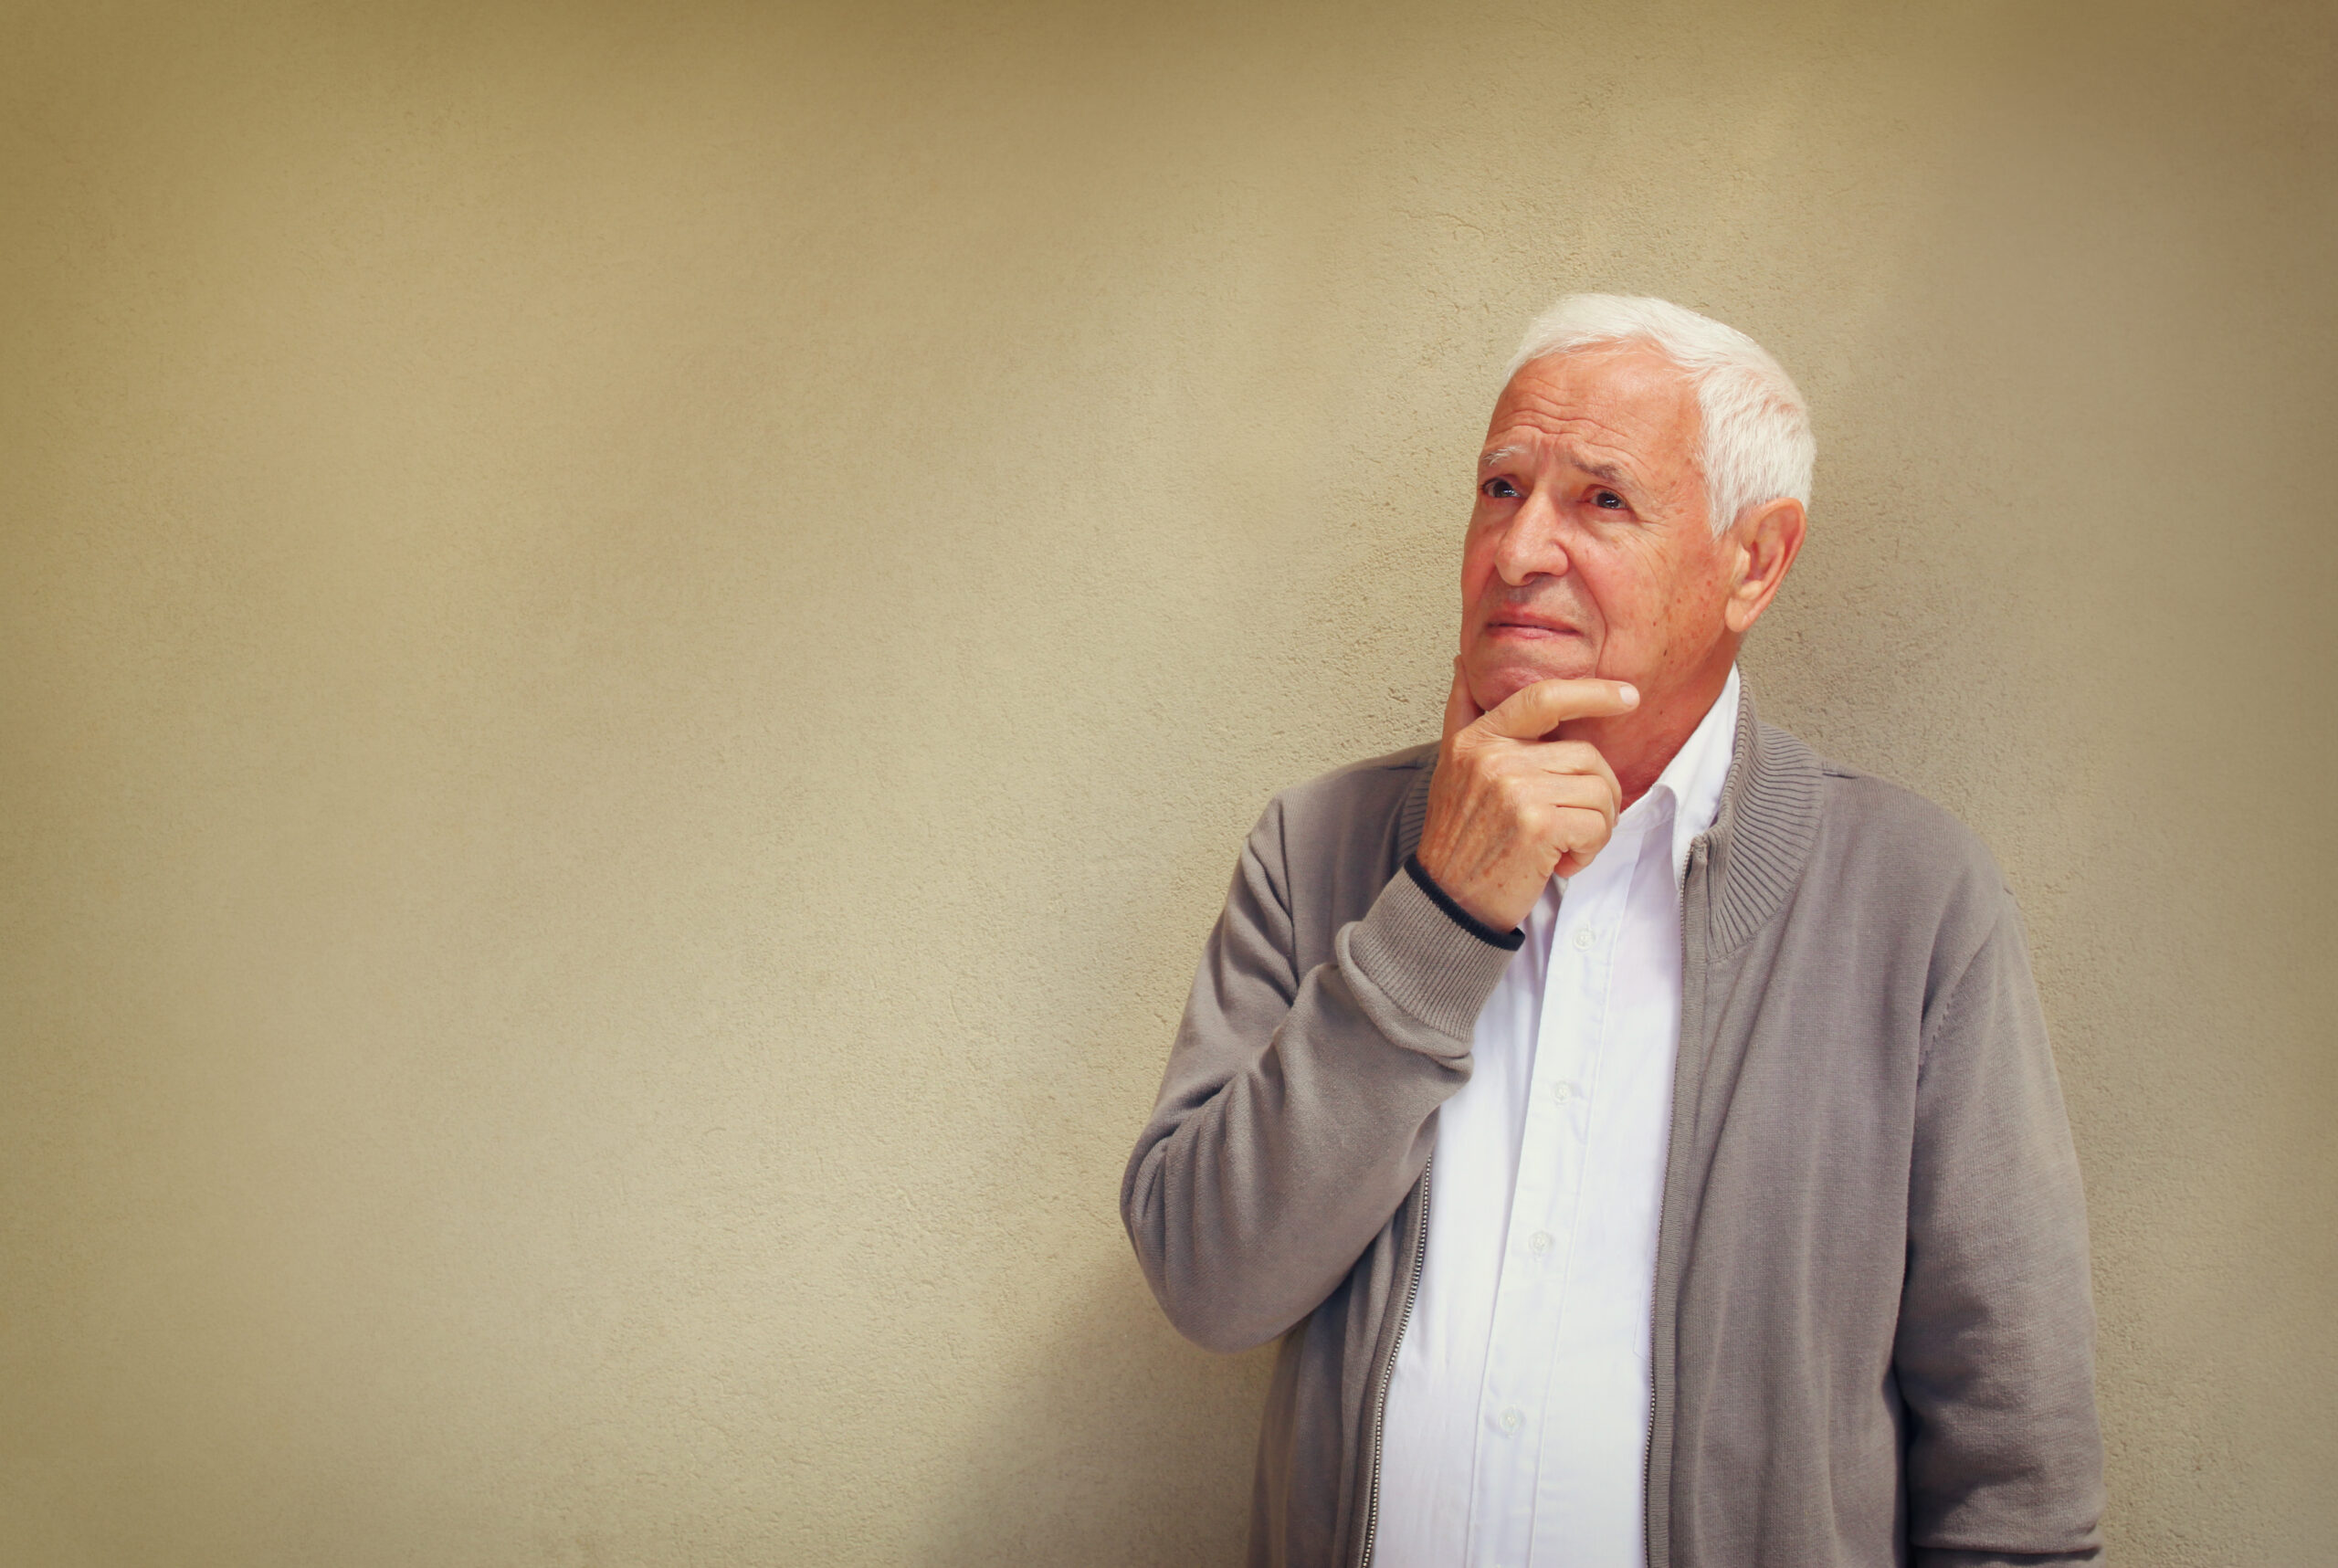 older man standing in front of tan wall while holding his chin